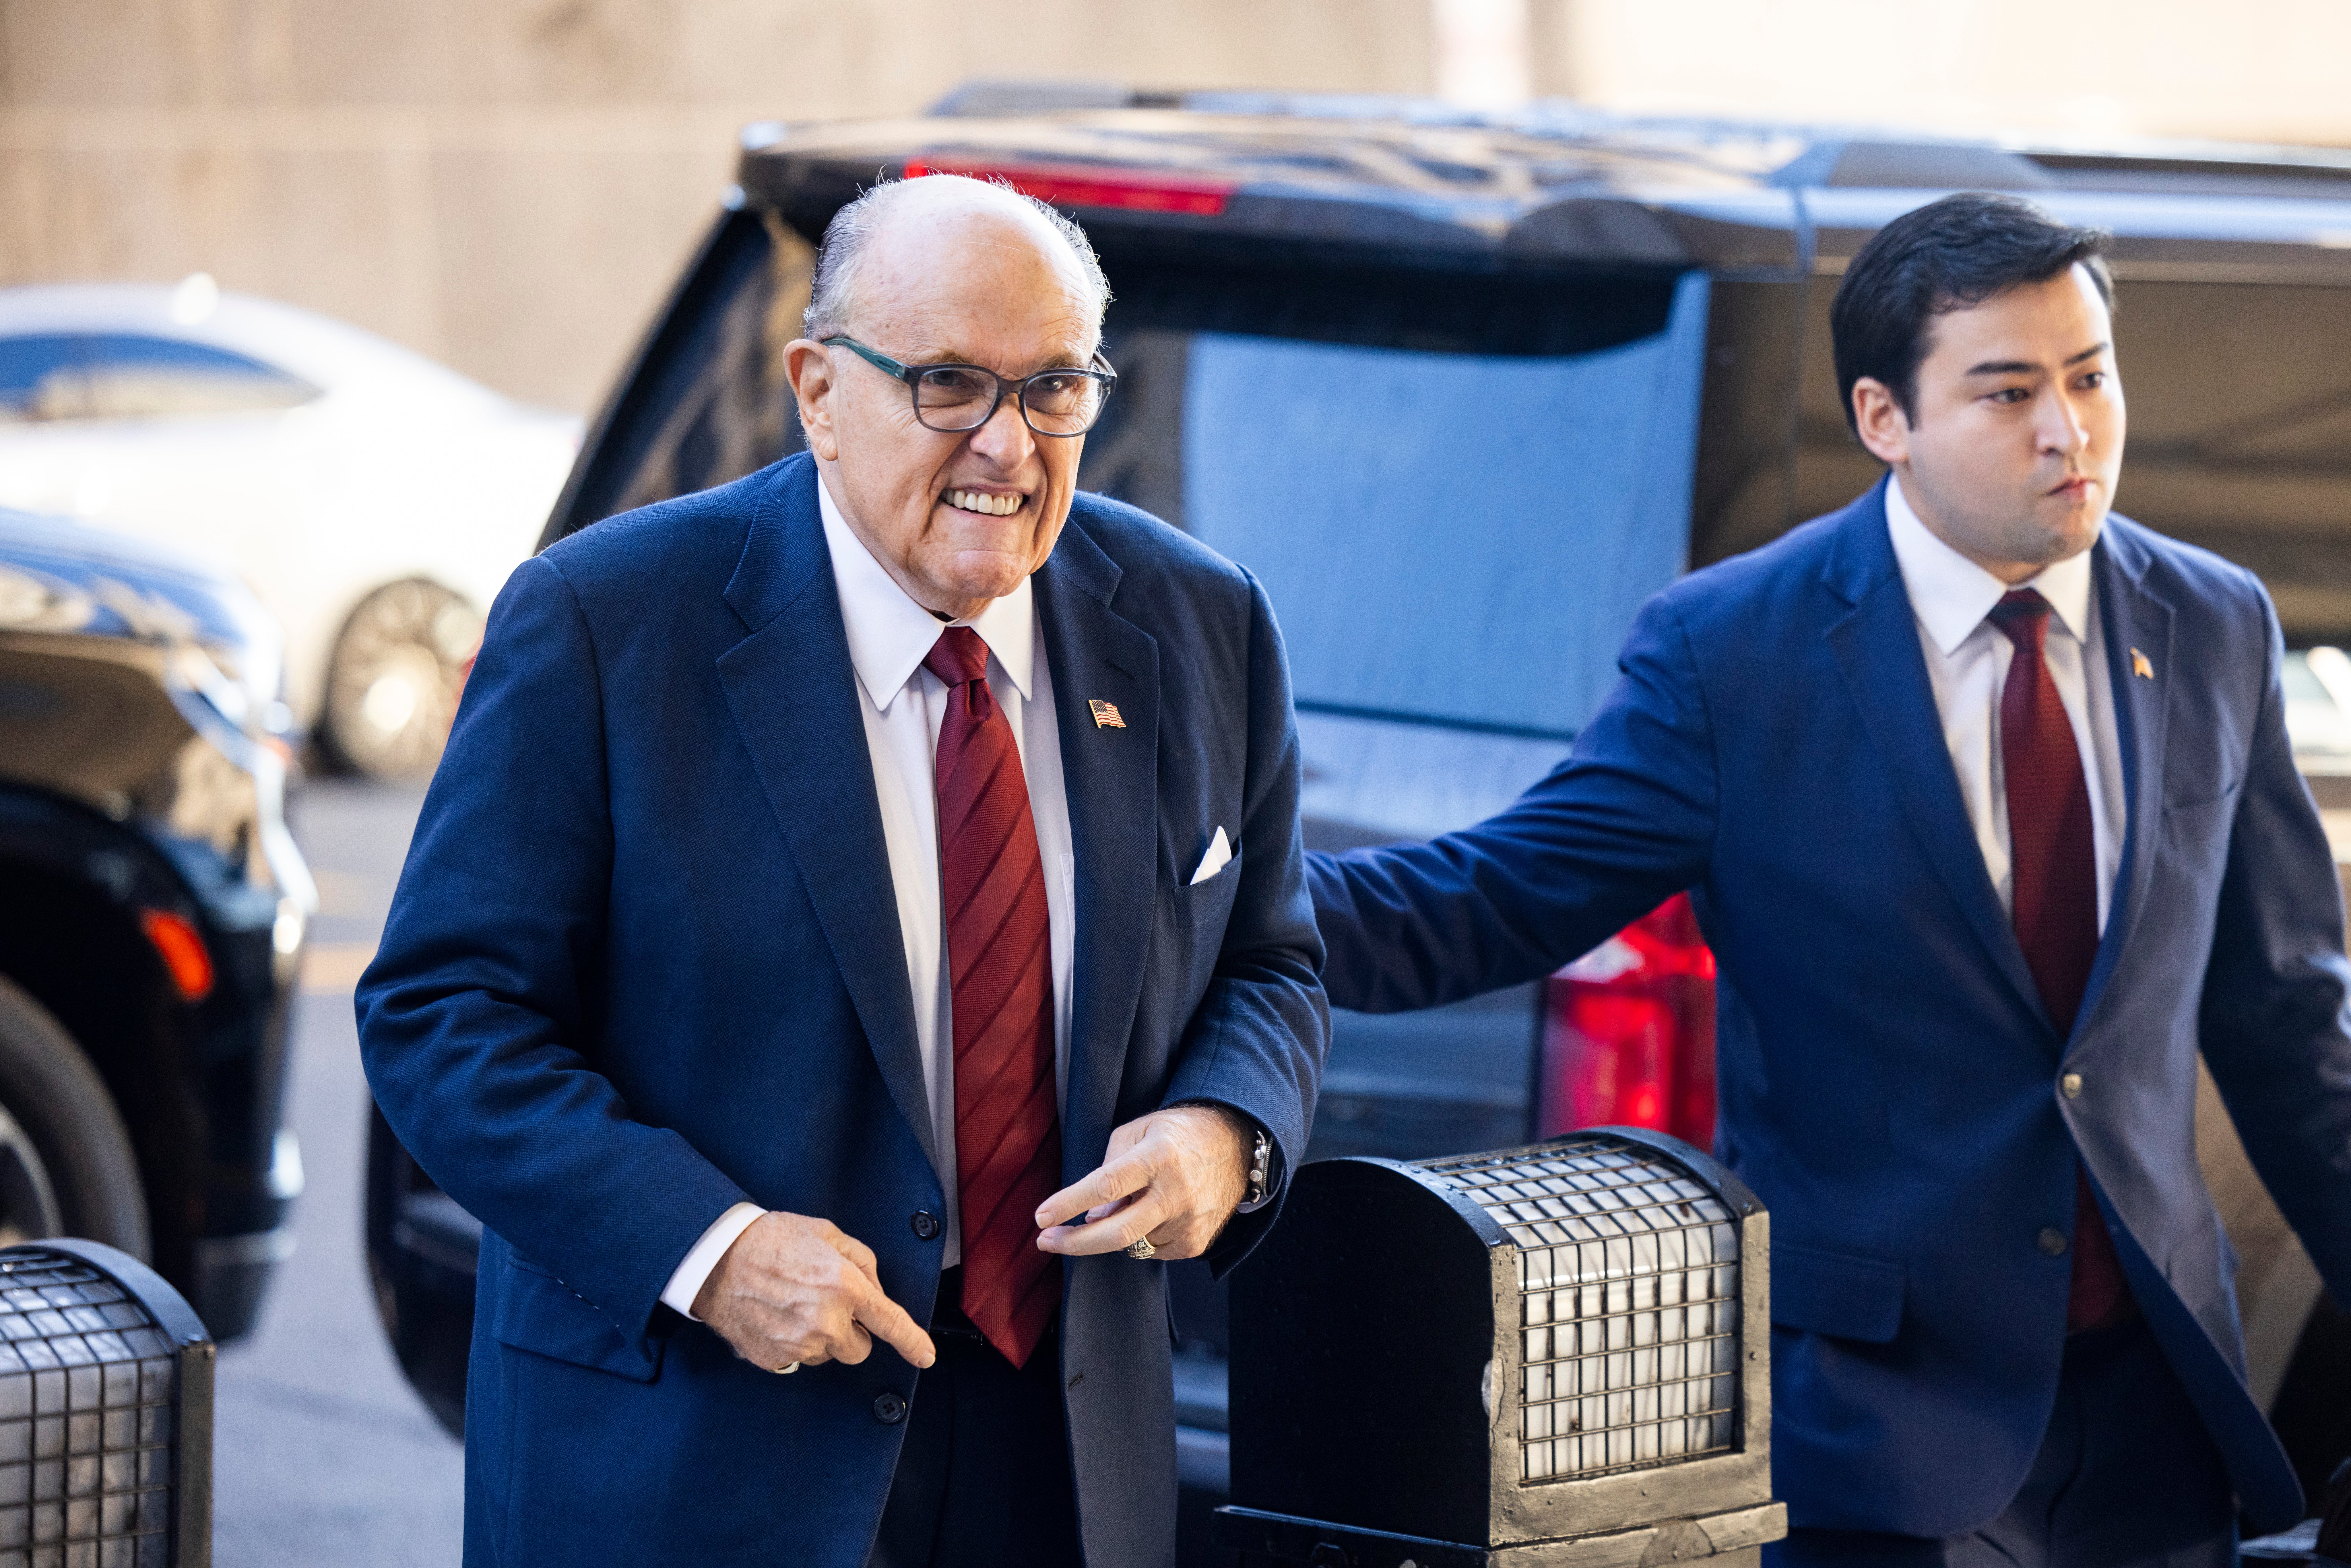 Rudy Giuliani arrives for the first day of a defamation trial in federal court in Washington DC on 11 December